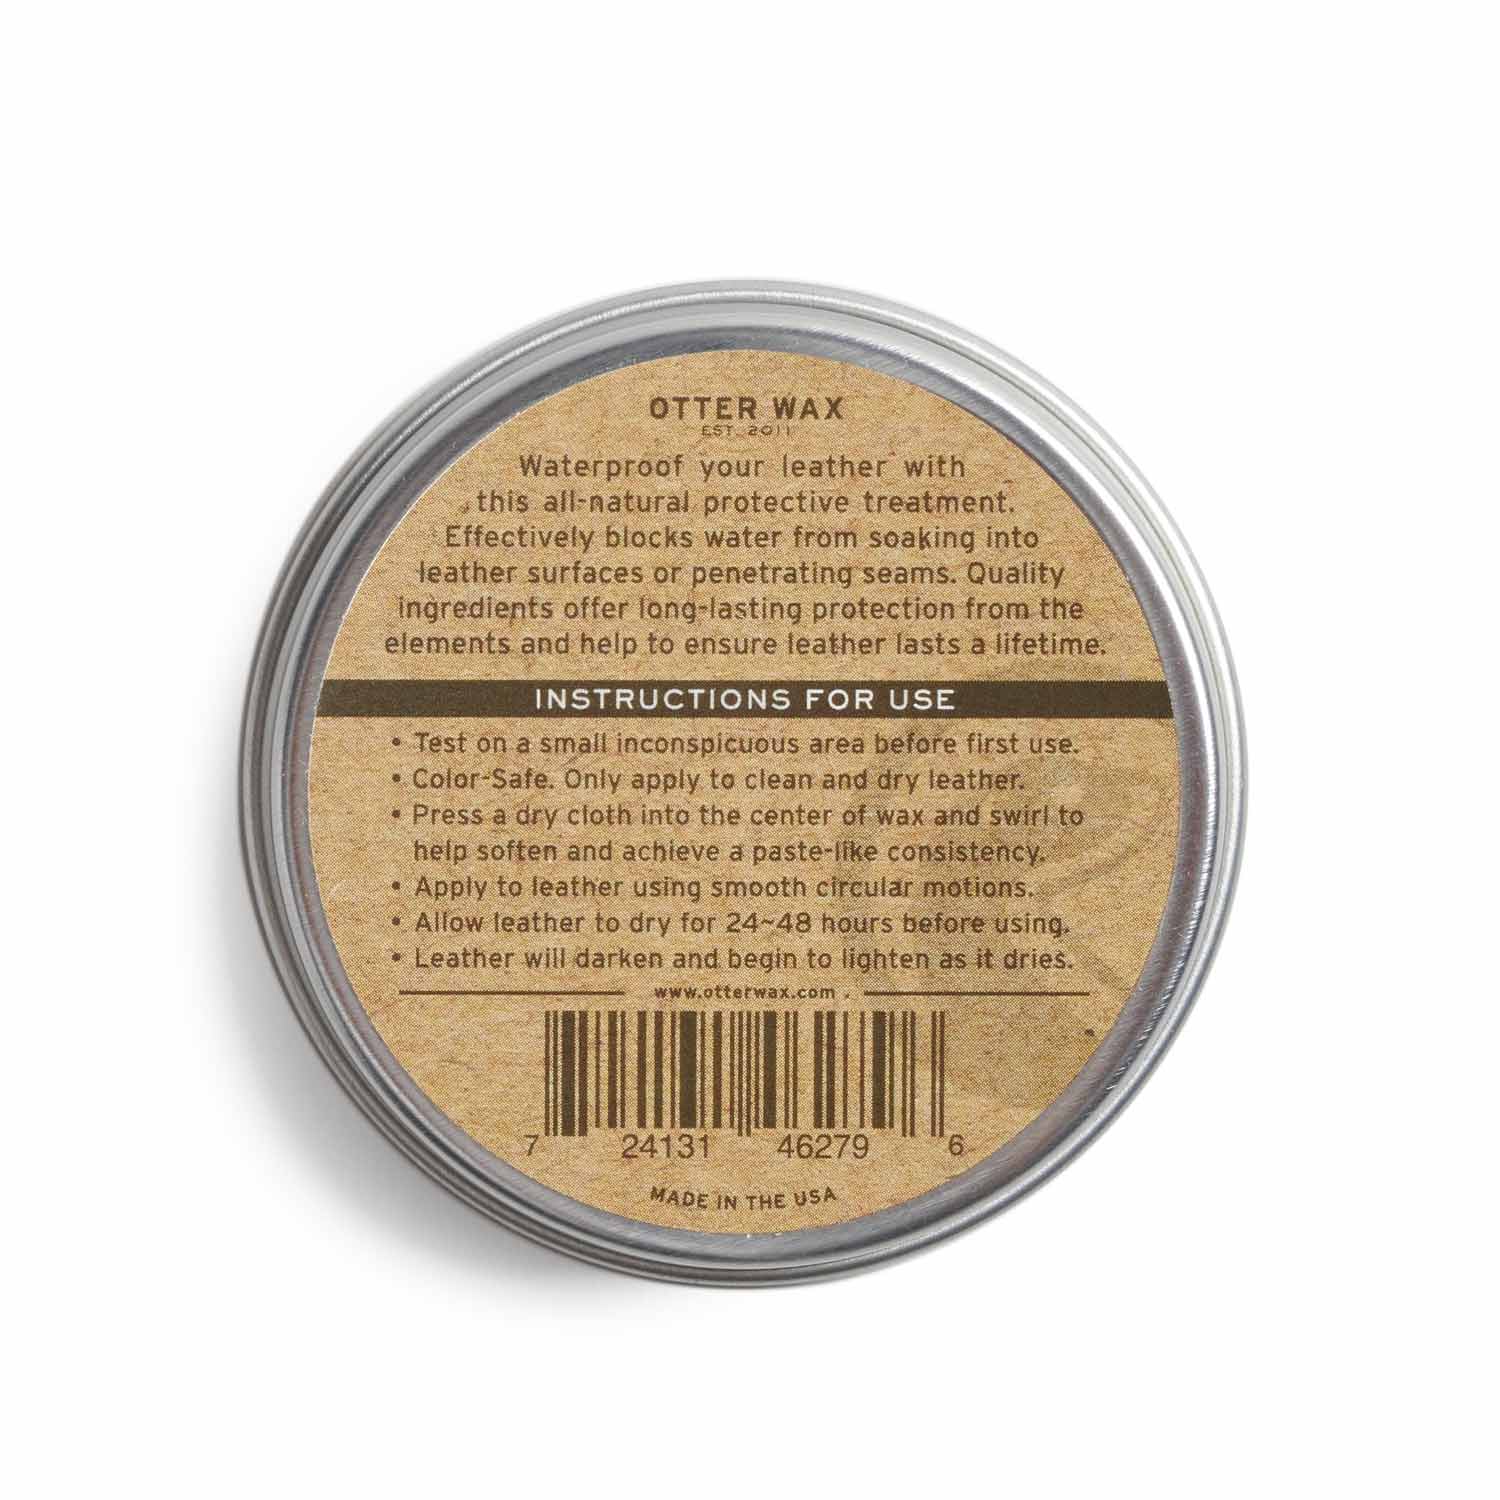 Otter Wax All-Natural Beeswax And Lanolin Waterproofer Treatment For Leather